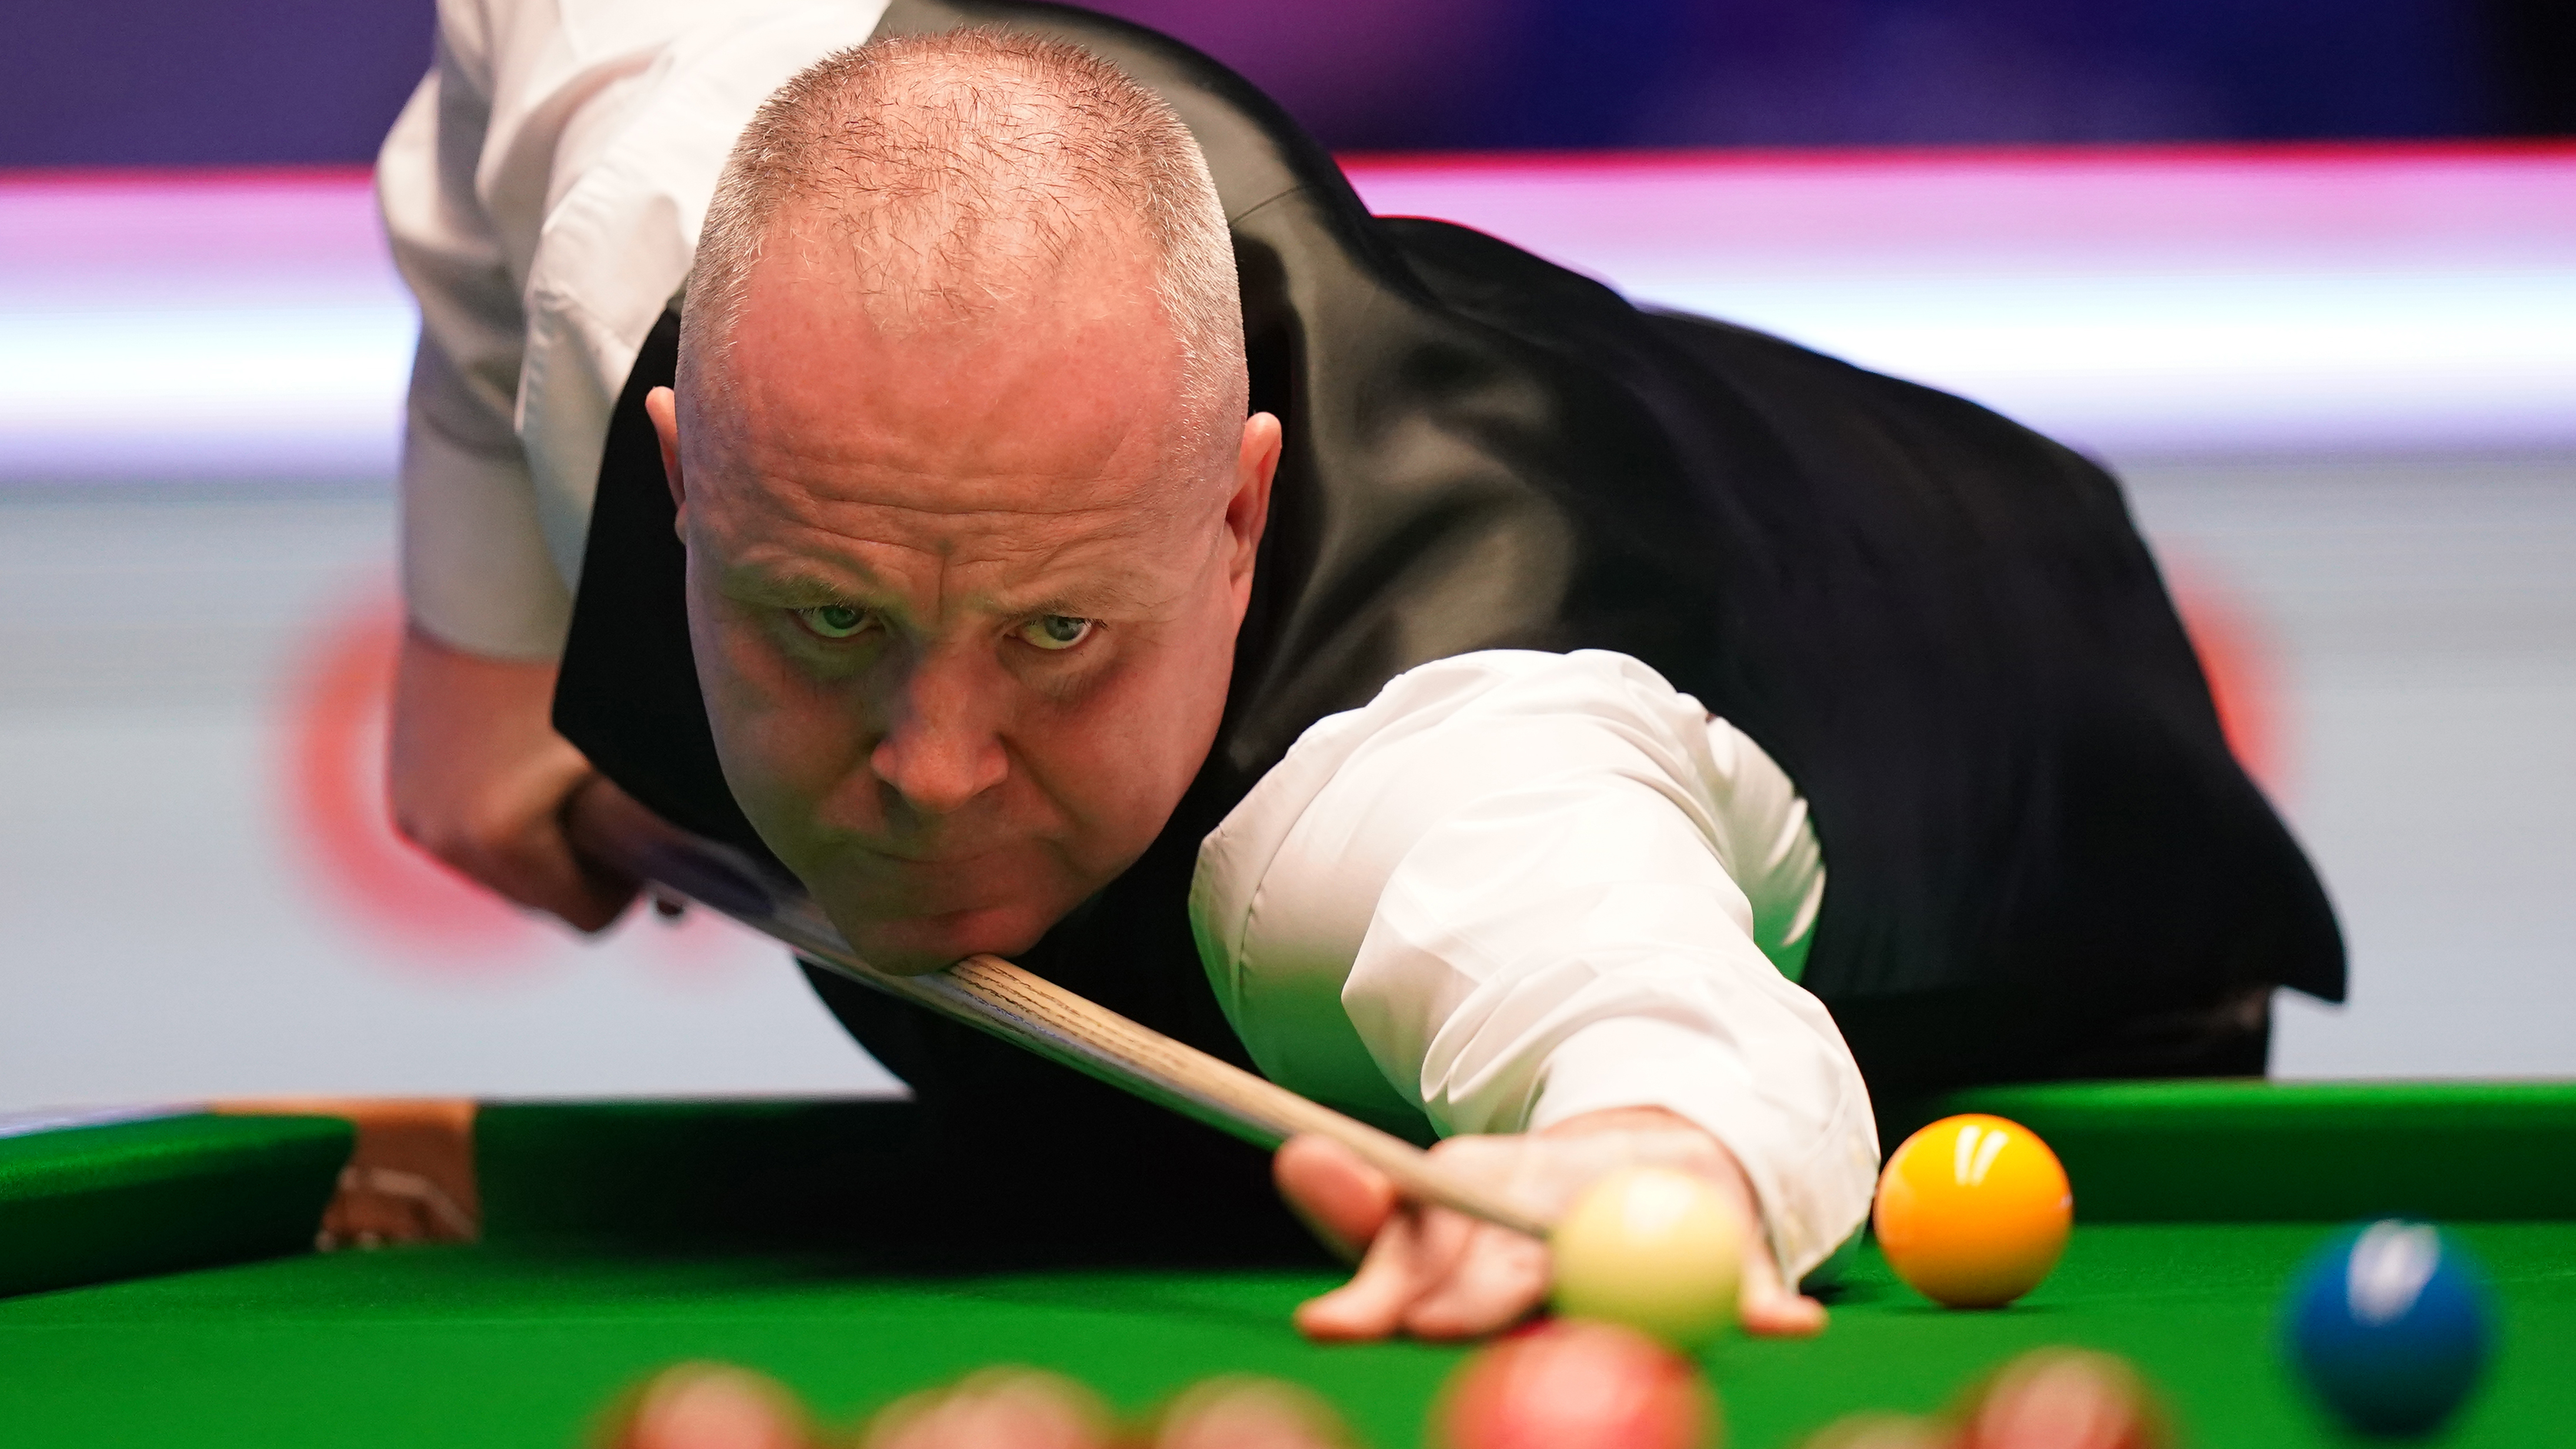 Snooker results John Higgins in reflective mood after losing at the Scottish Open